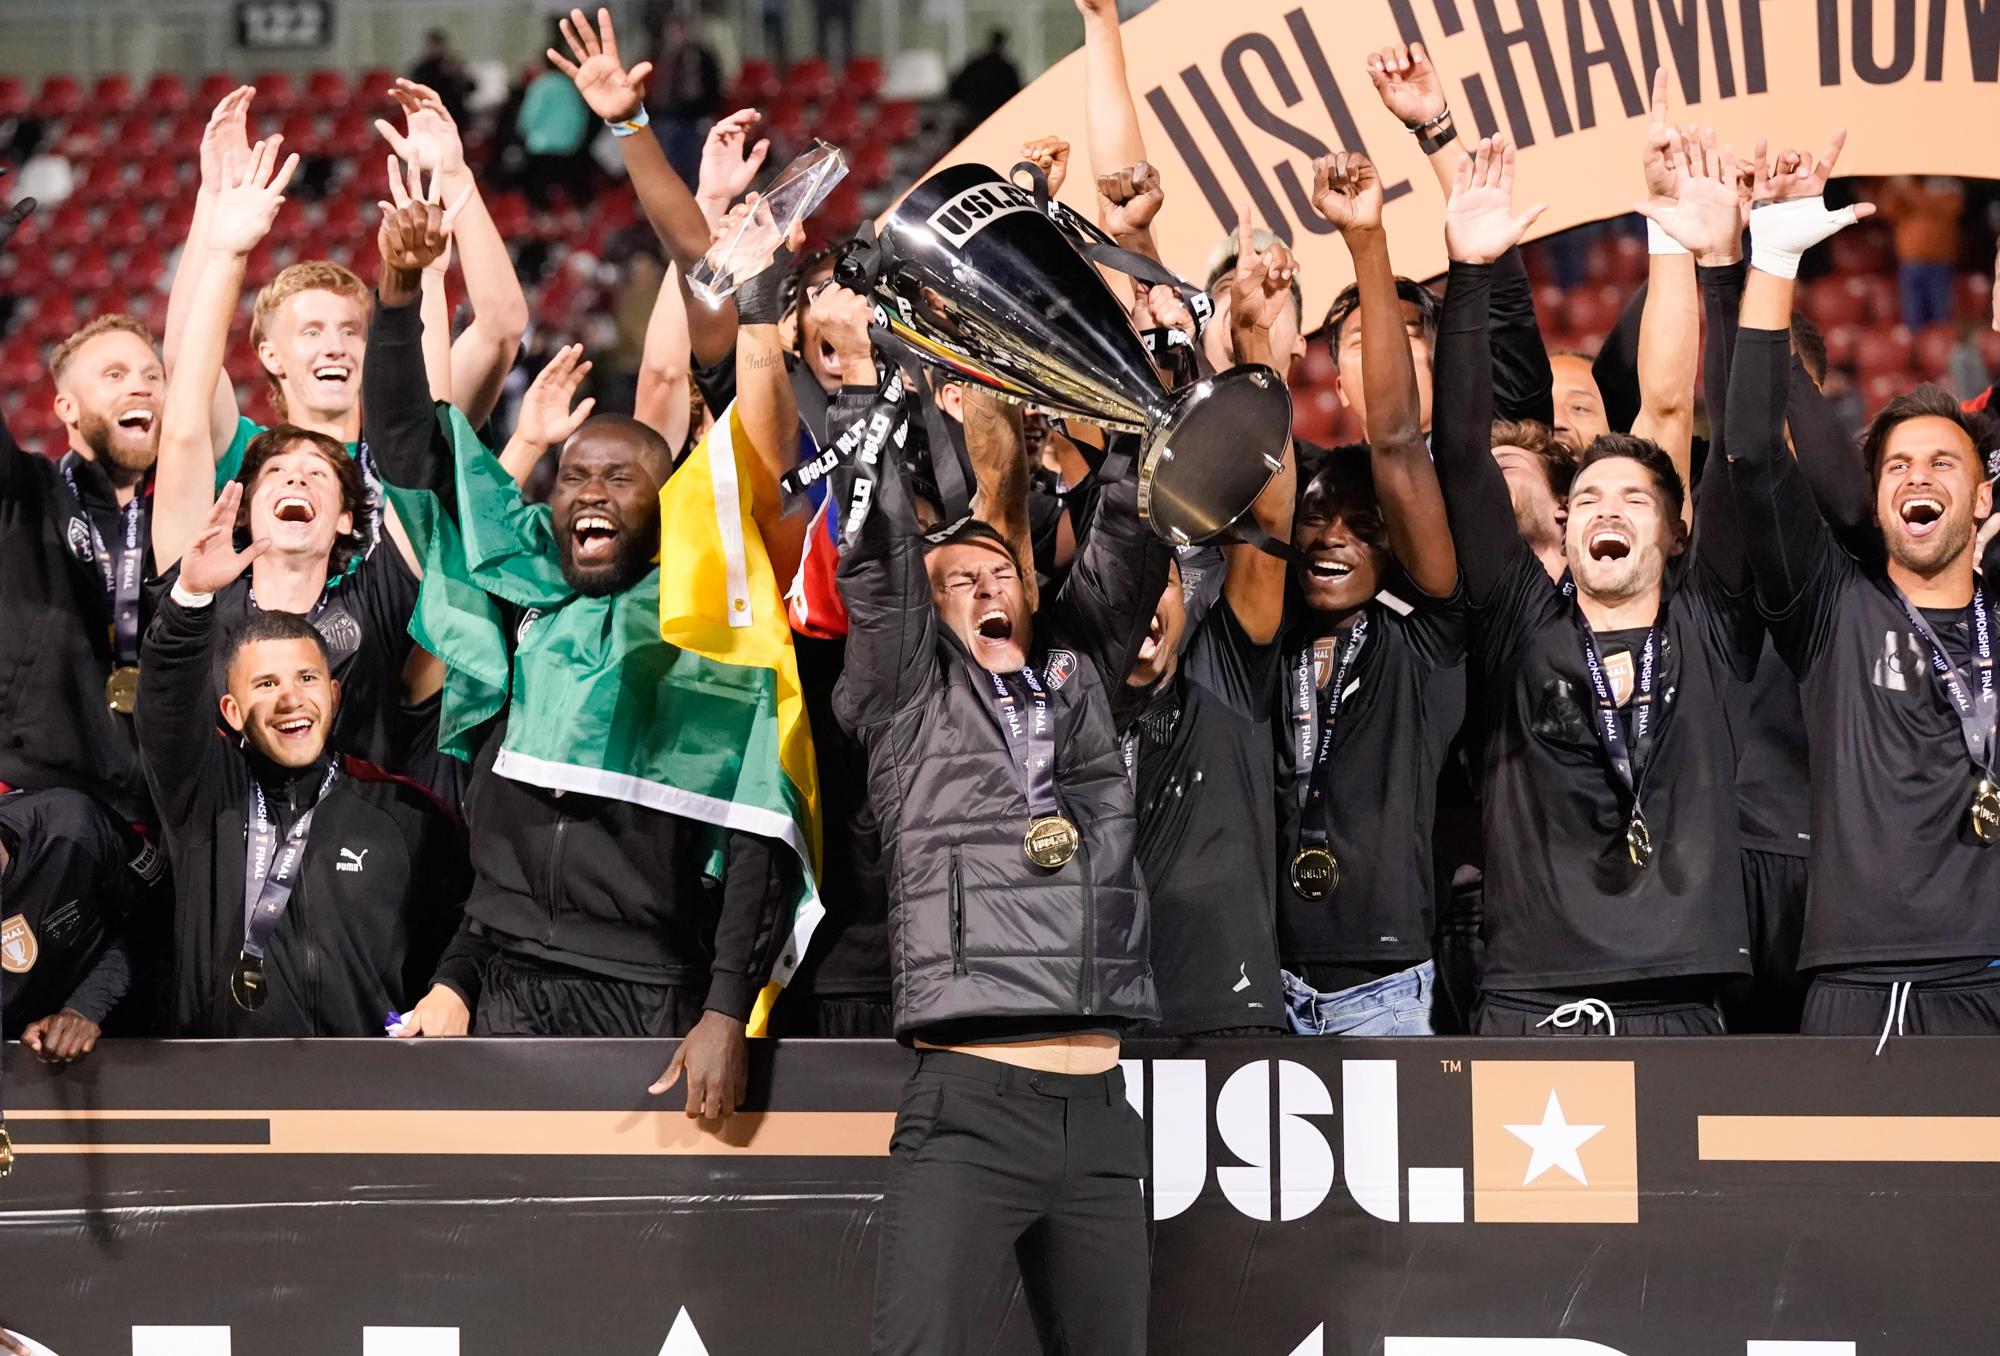 CHAMPIONS OF THE CHAMPIONSHIP: San Antonio secures USL title, defeating  Louisville City - Front Row Soccer